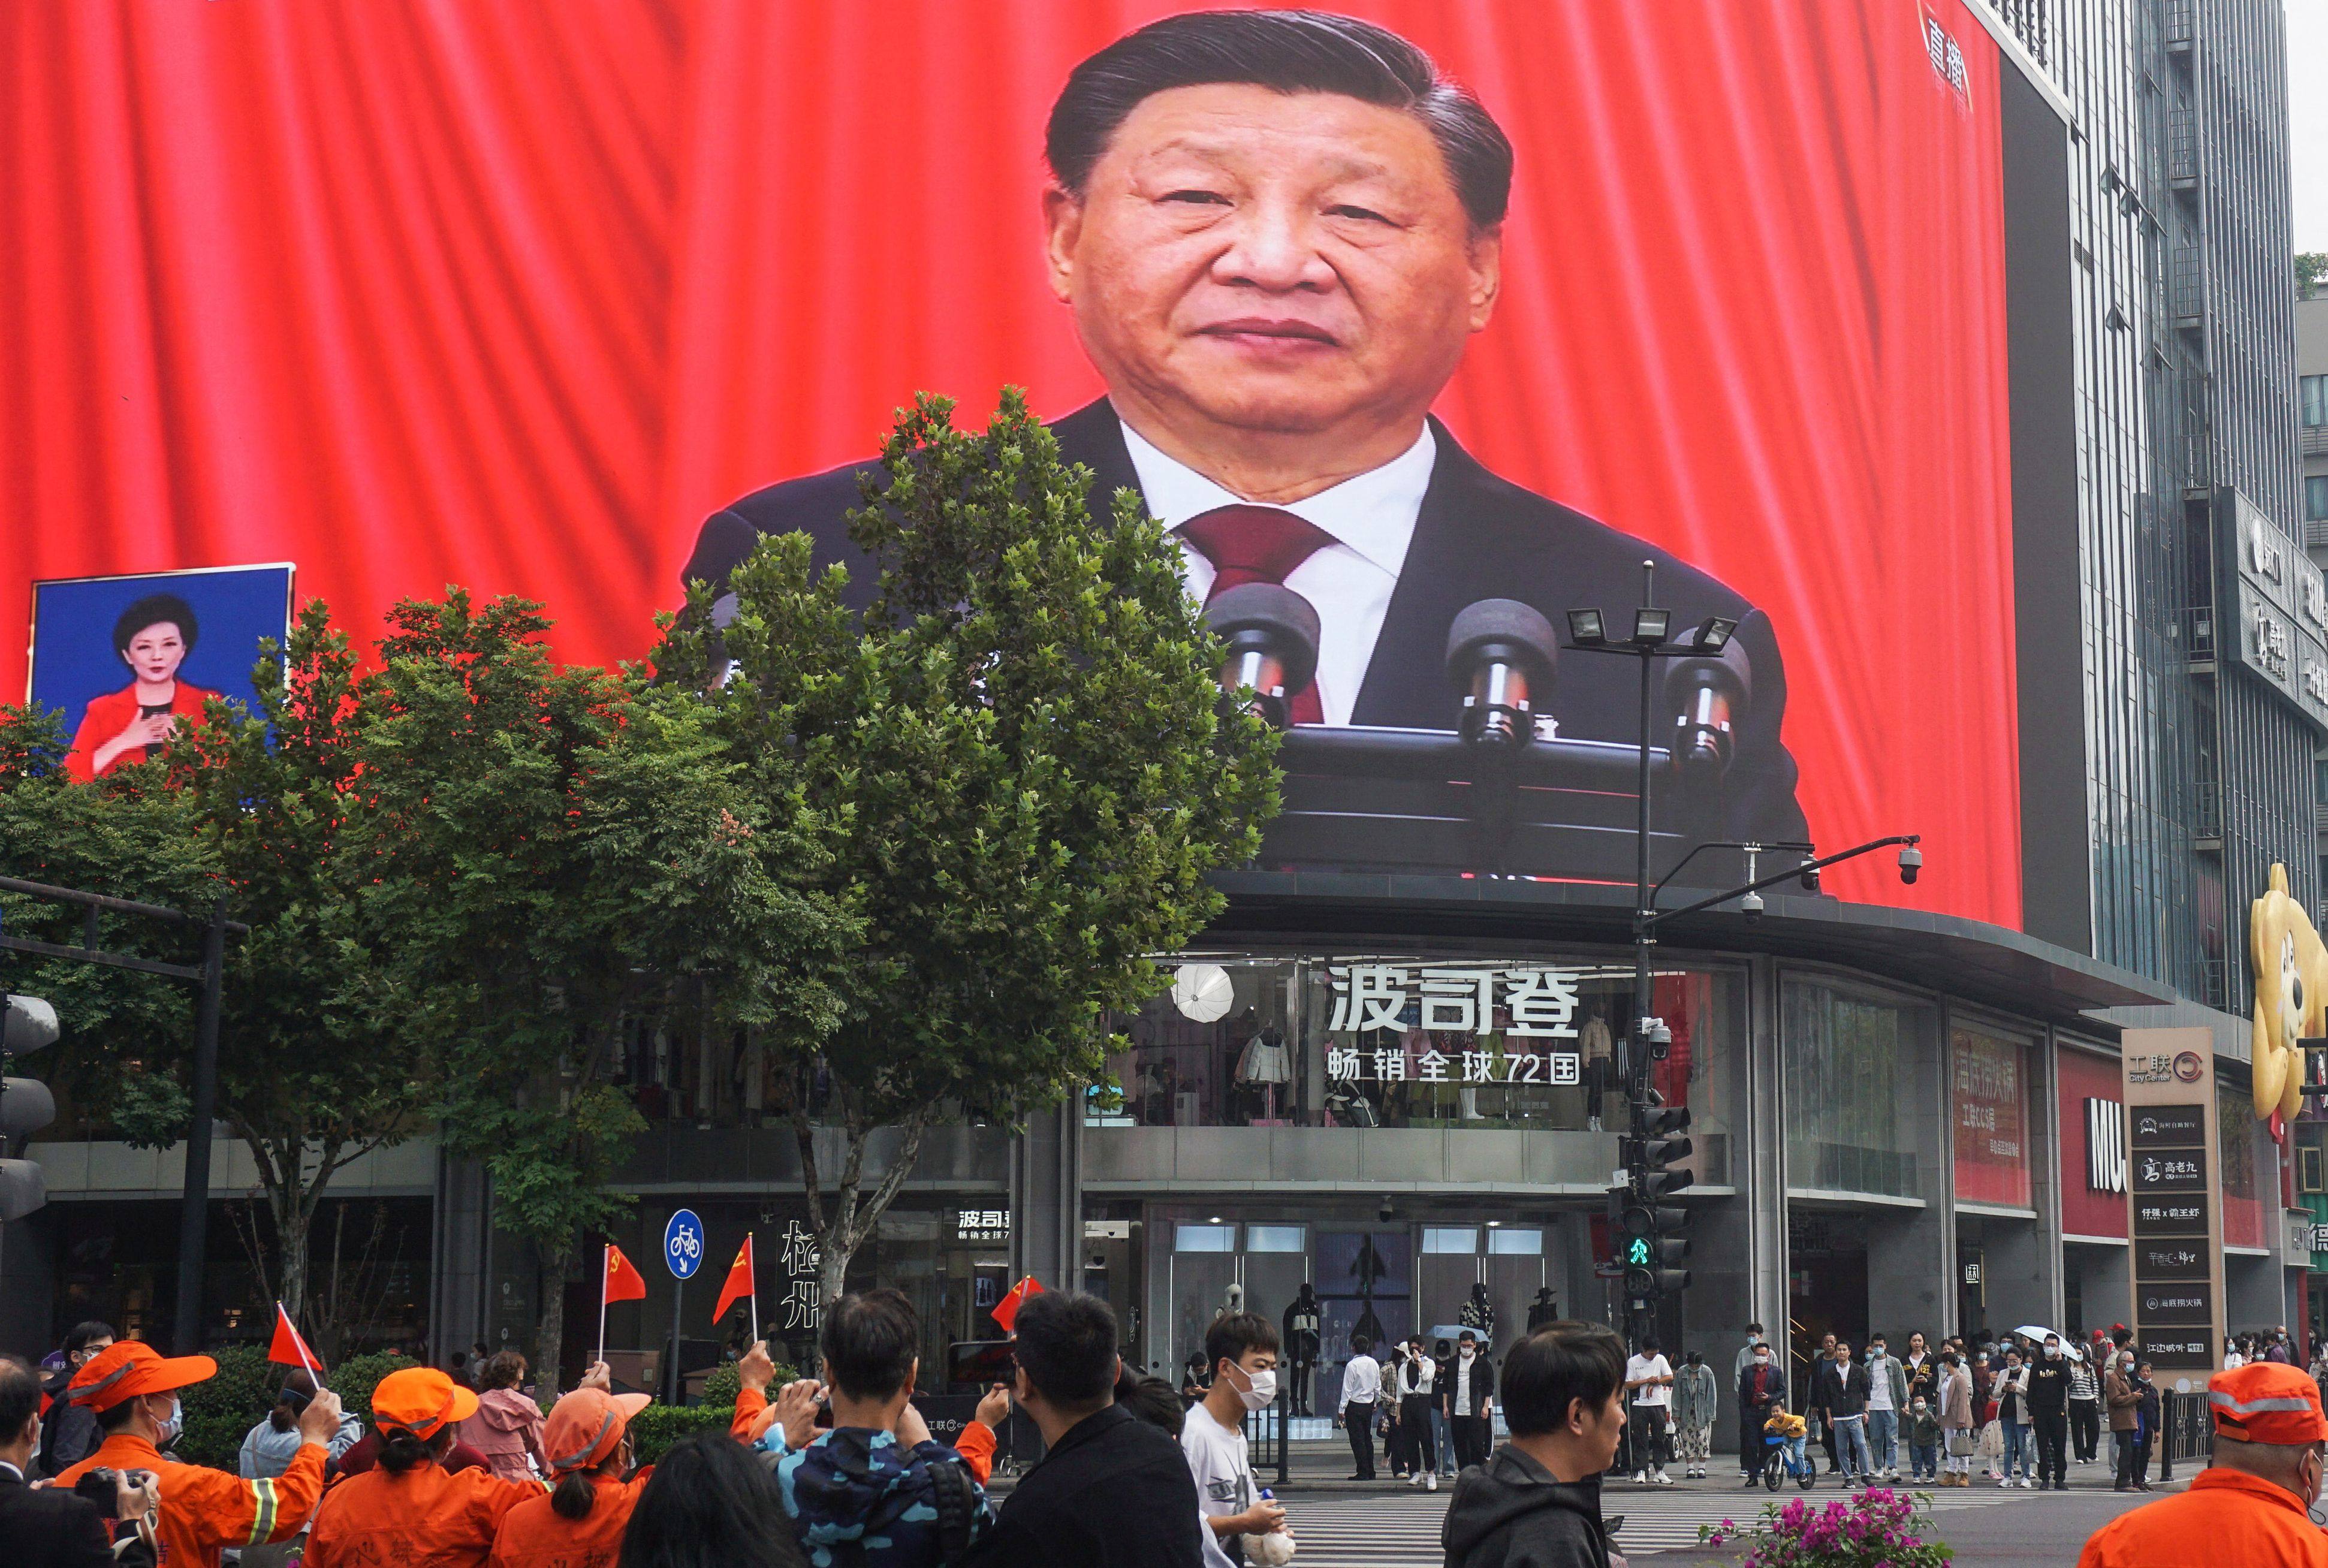 People in Hangzhou watch an outdoor screen showing President Xi Jinping addressing the Communist Party congress on Sunday. Photo: AFP